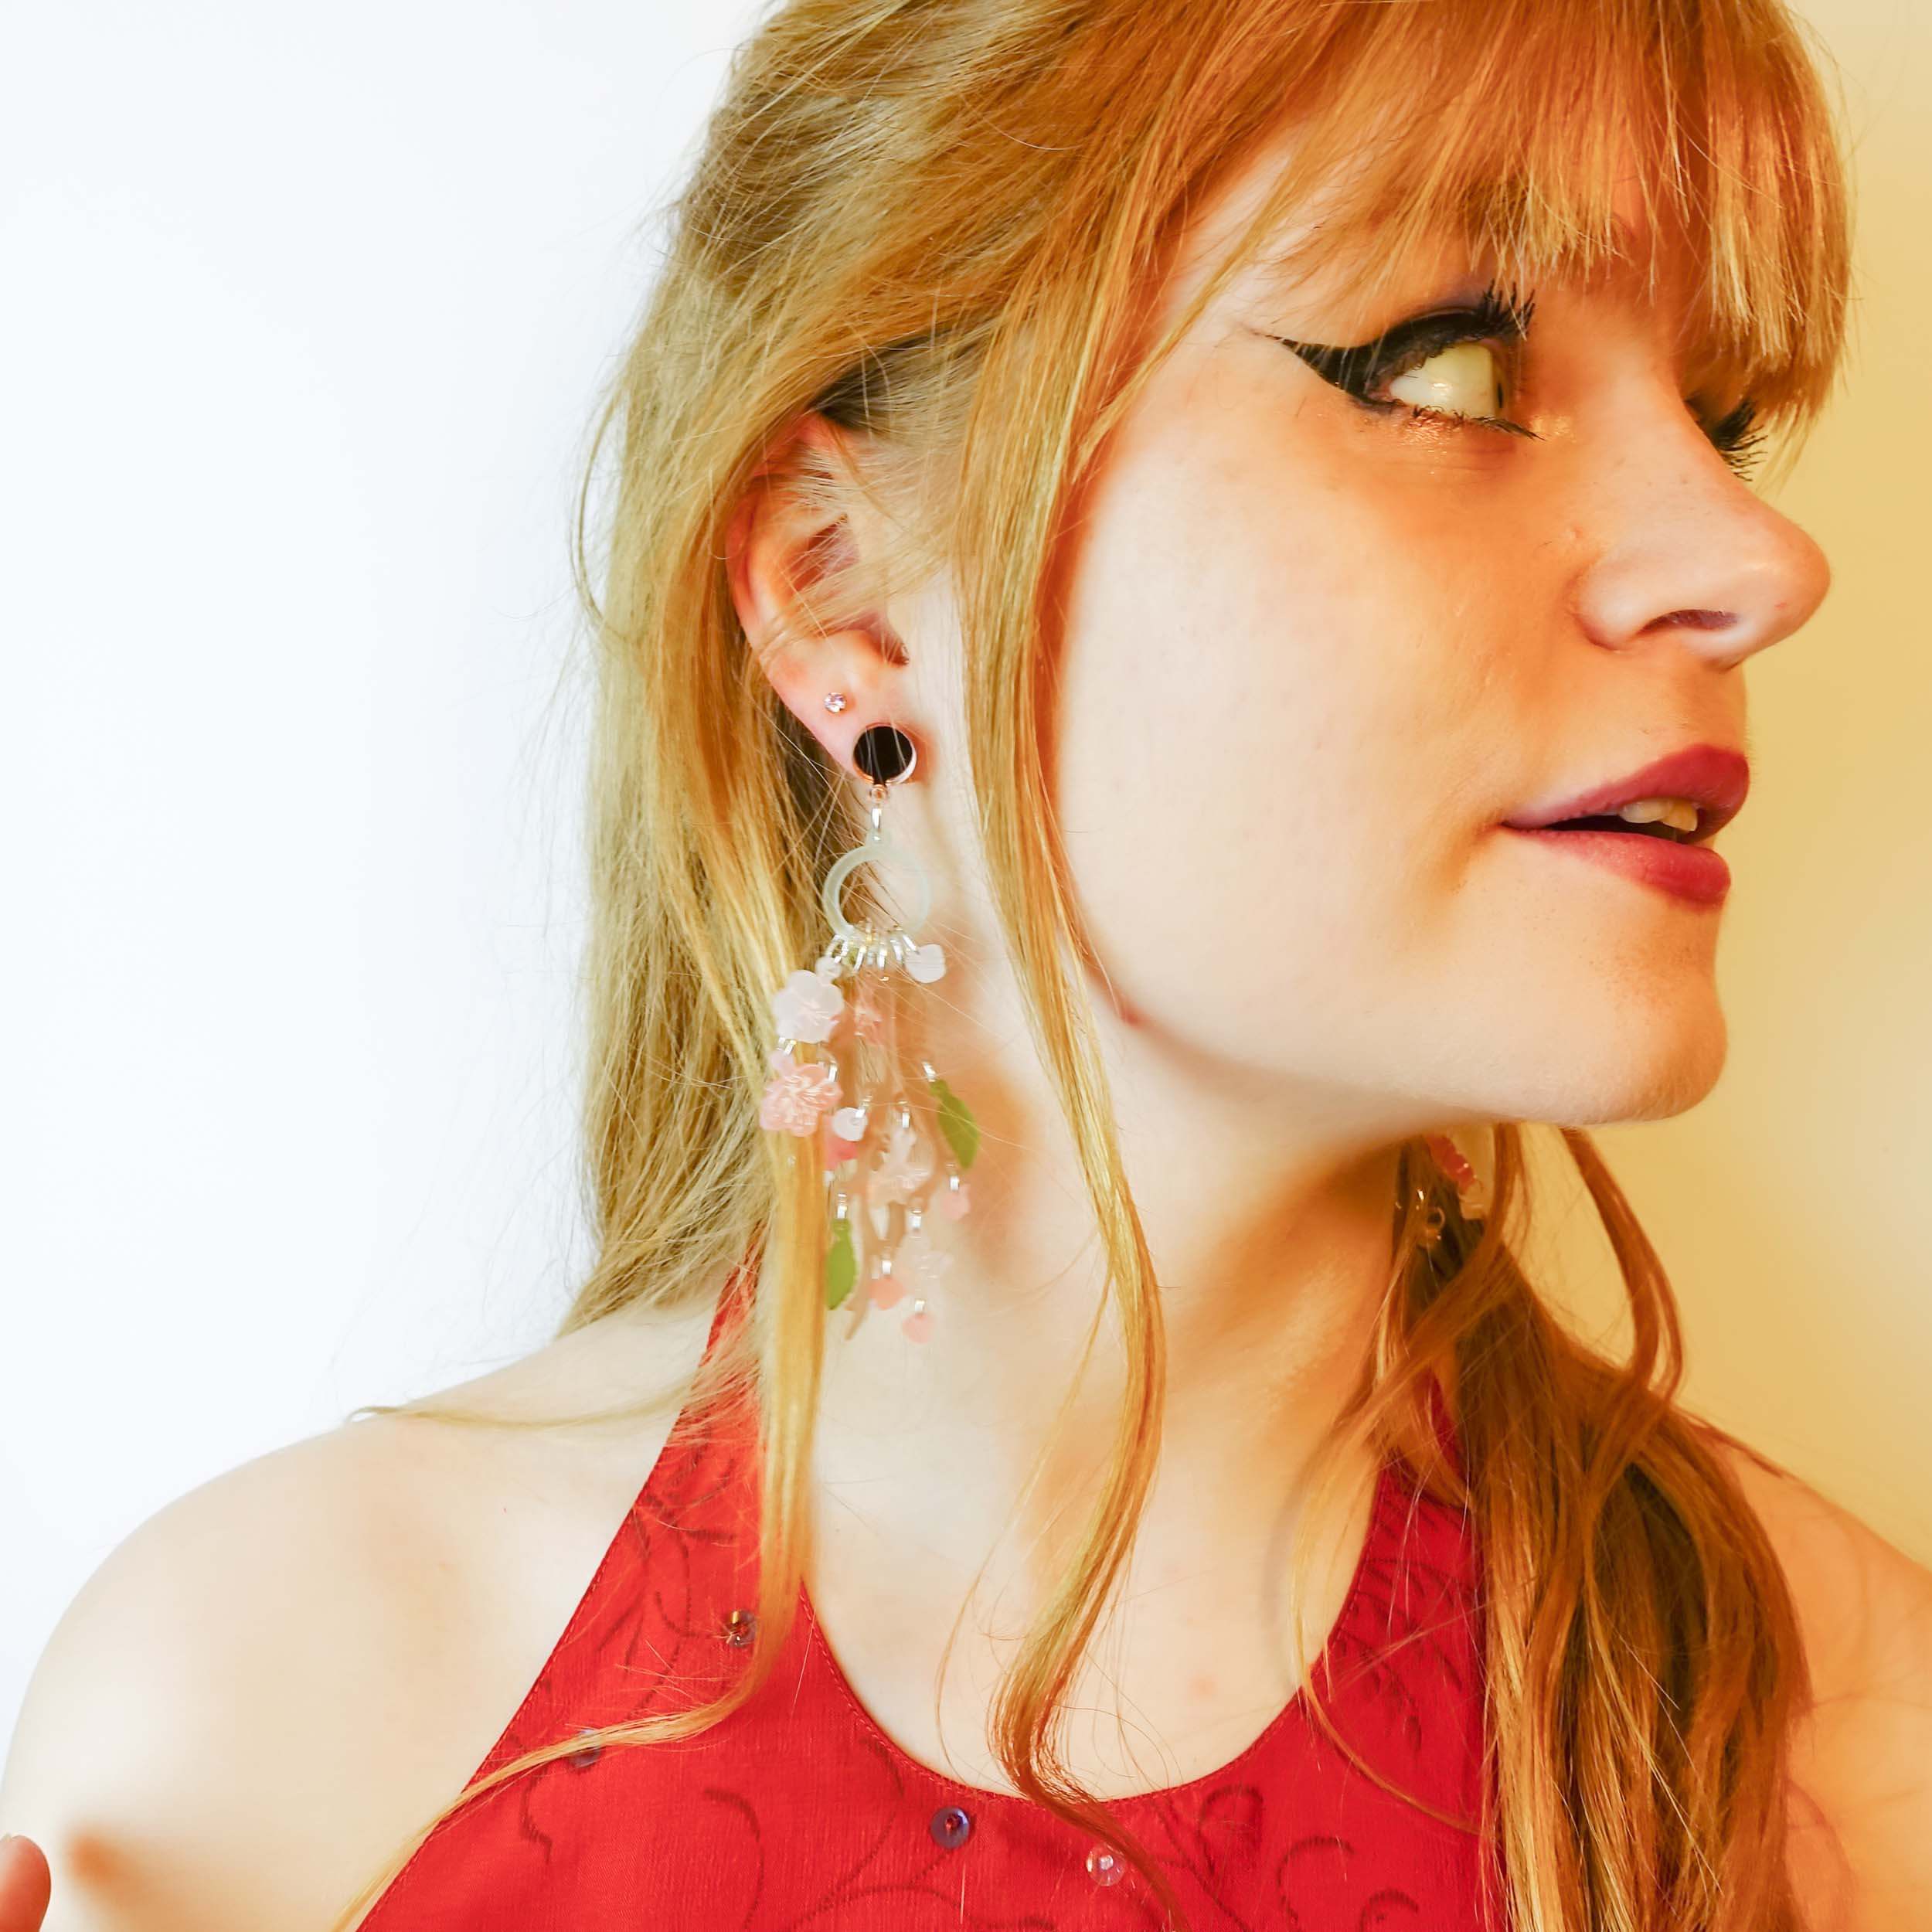 Model wears Cherry Blossom limited edition statement earrings by Wear and Resist. 